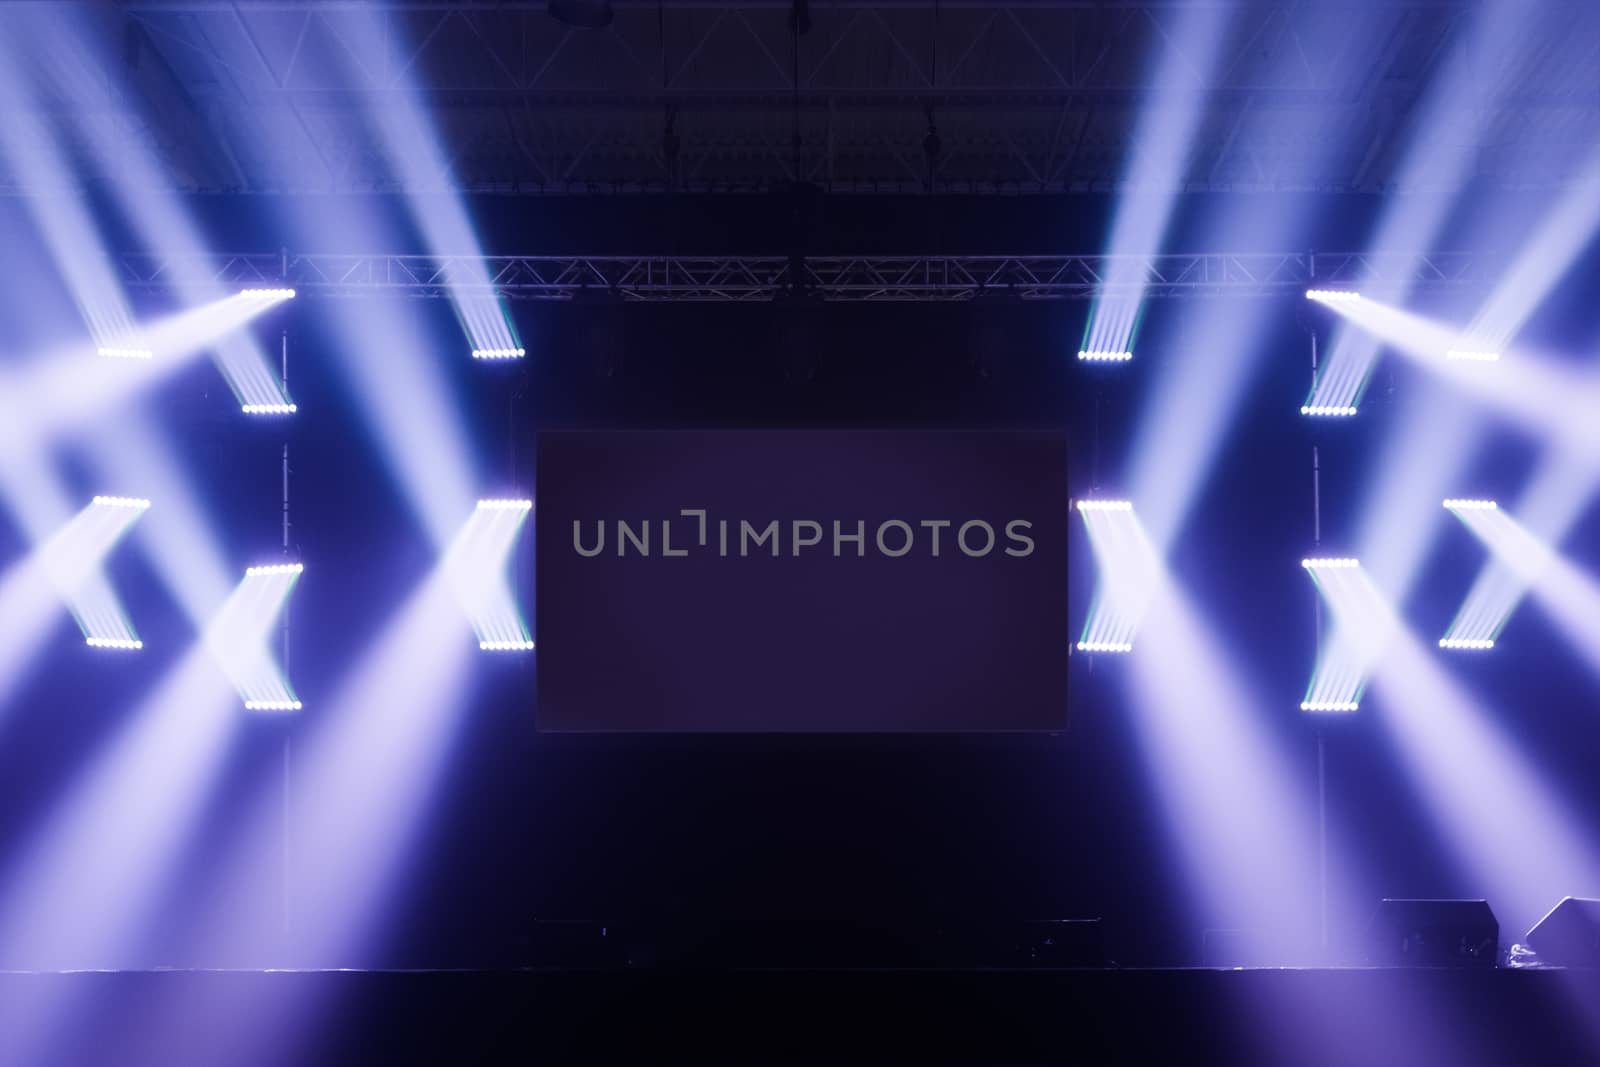 Spot lights Stage With Blank Screen in the Middle by aetb